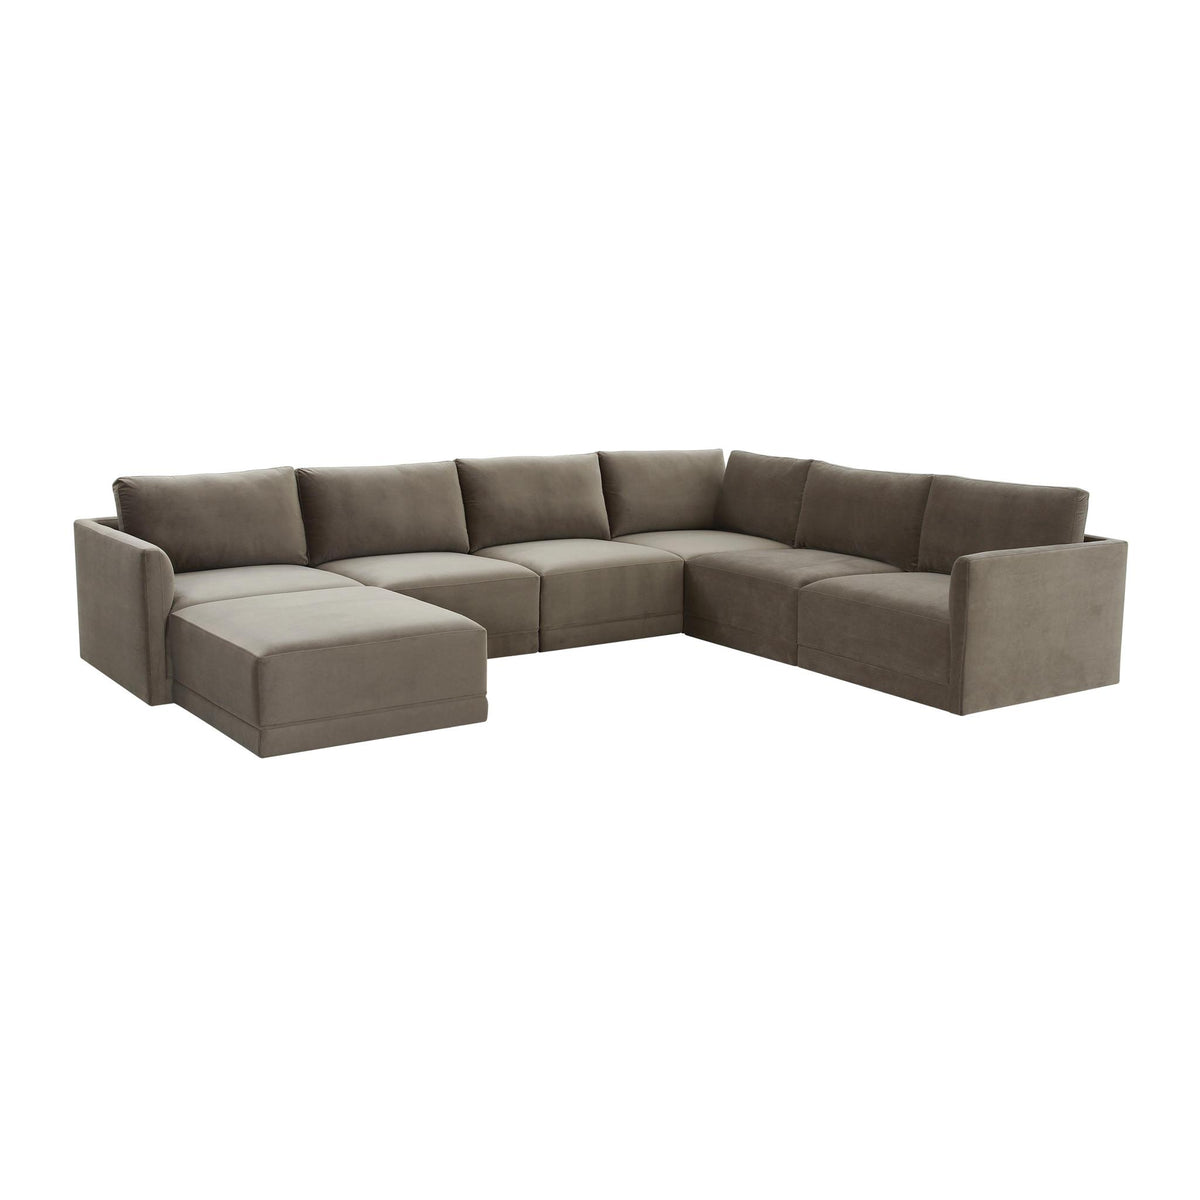 TOV Furniture Modern Willow Taupe Modular Large Chaise Sectional - REN-L03110-SEC5